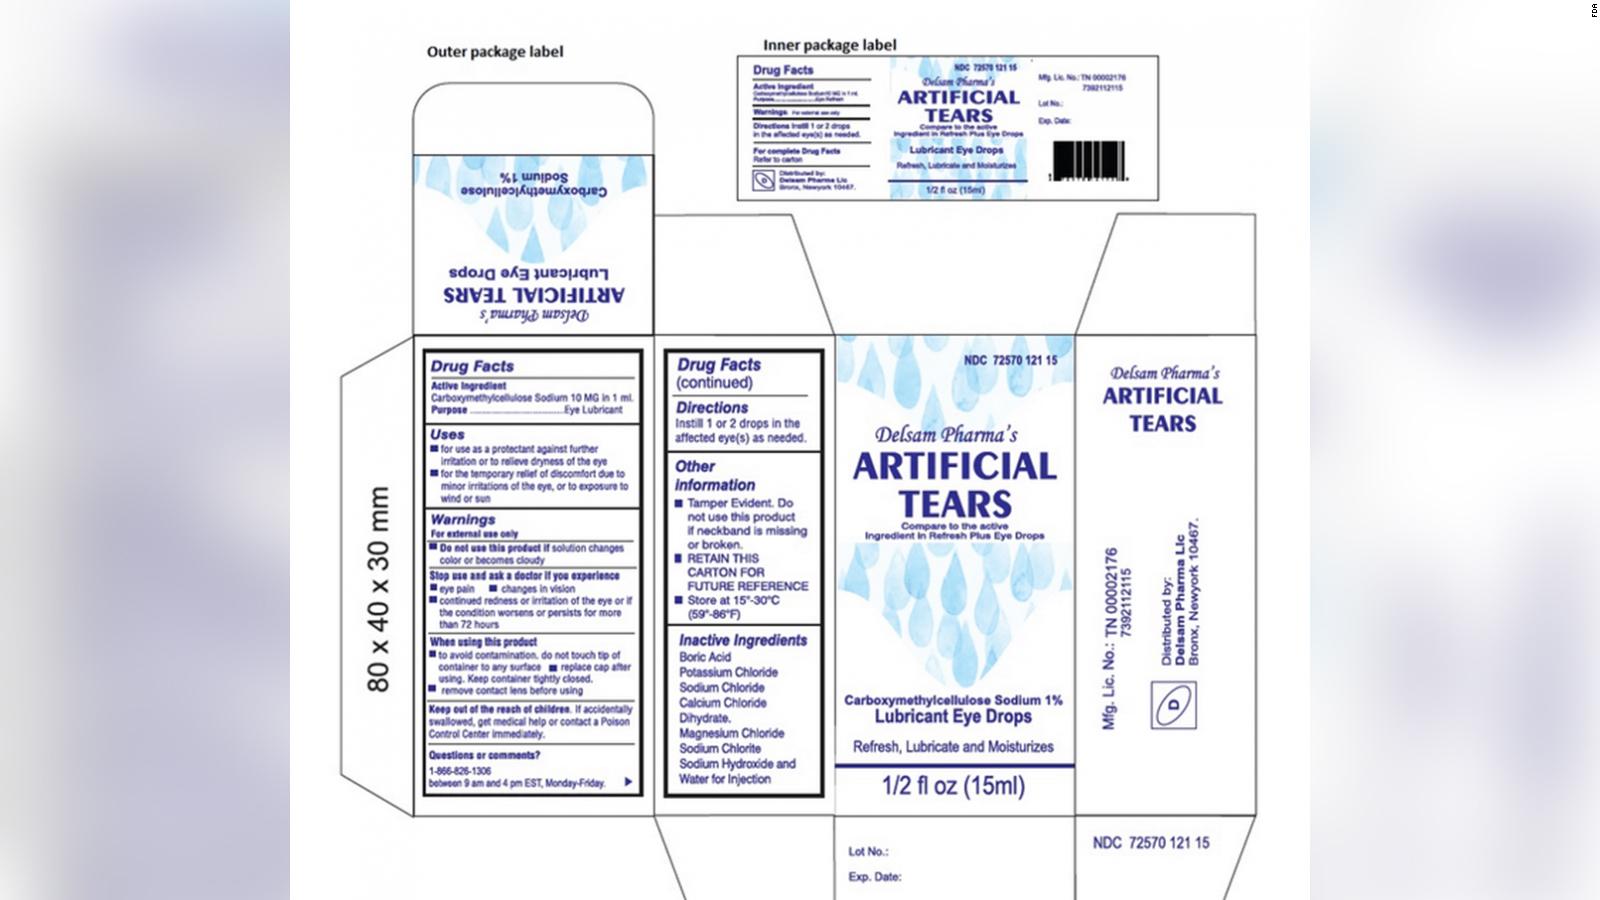 Eye drop manufacturer issues recall amid CDC investigation of